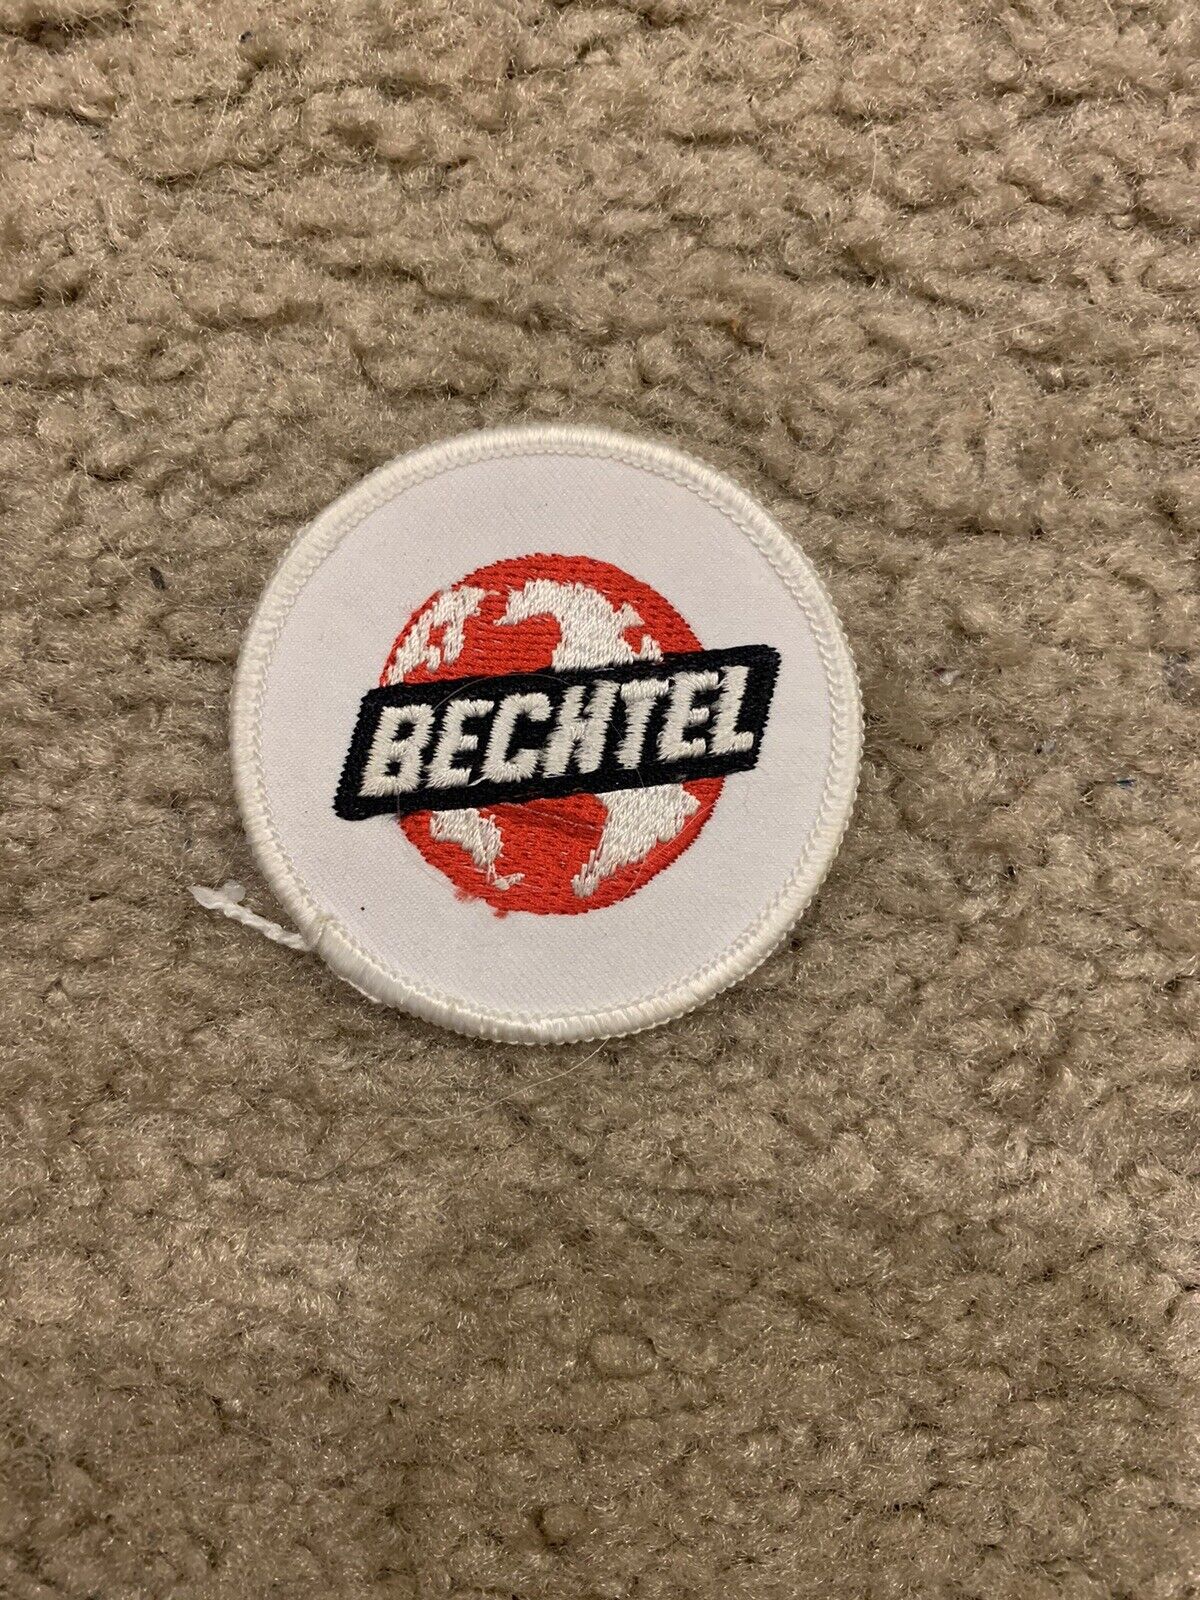 Vintage Bechtel Engineering Construction Company Hat Jacket Patch New NOS 1990s